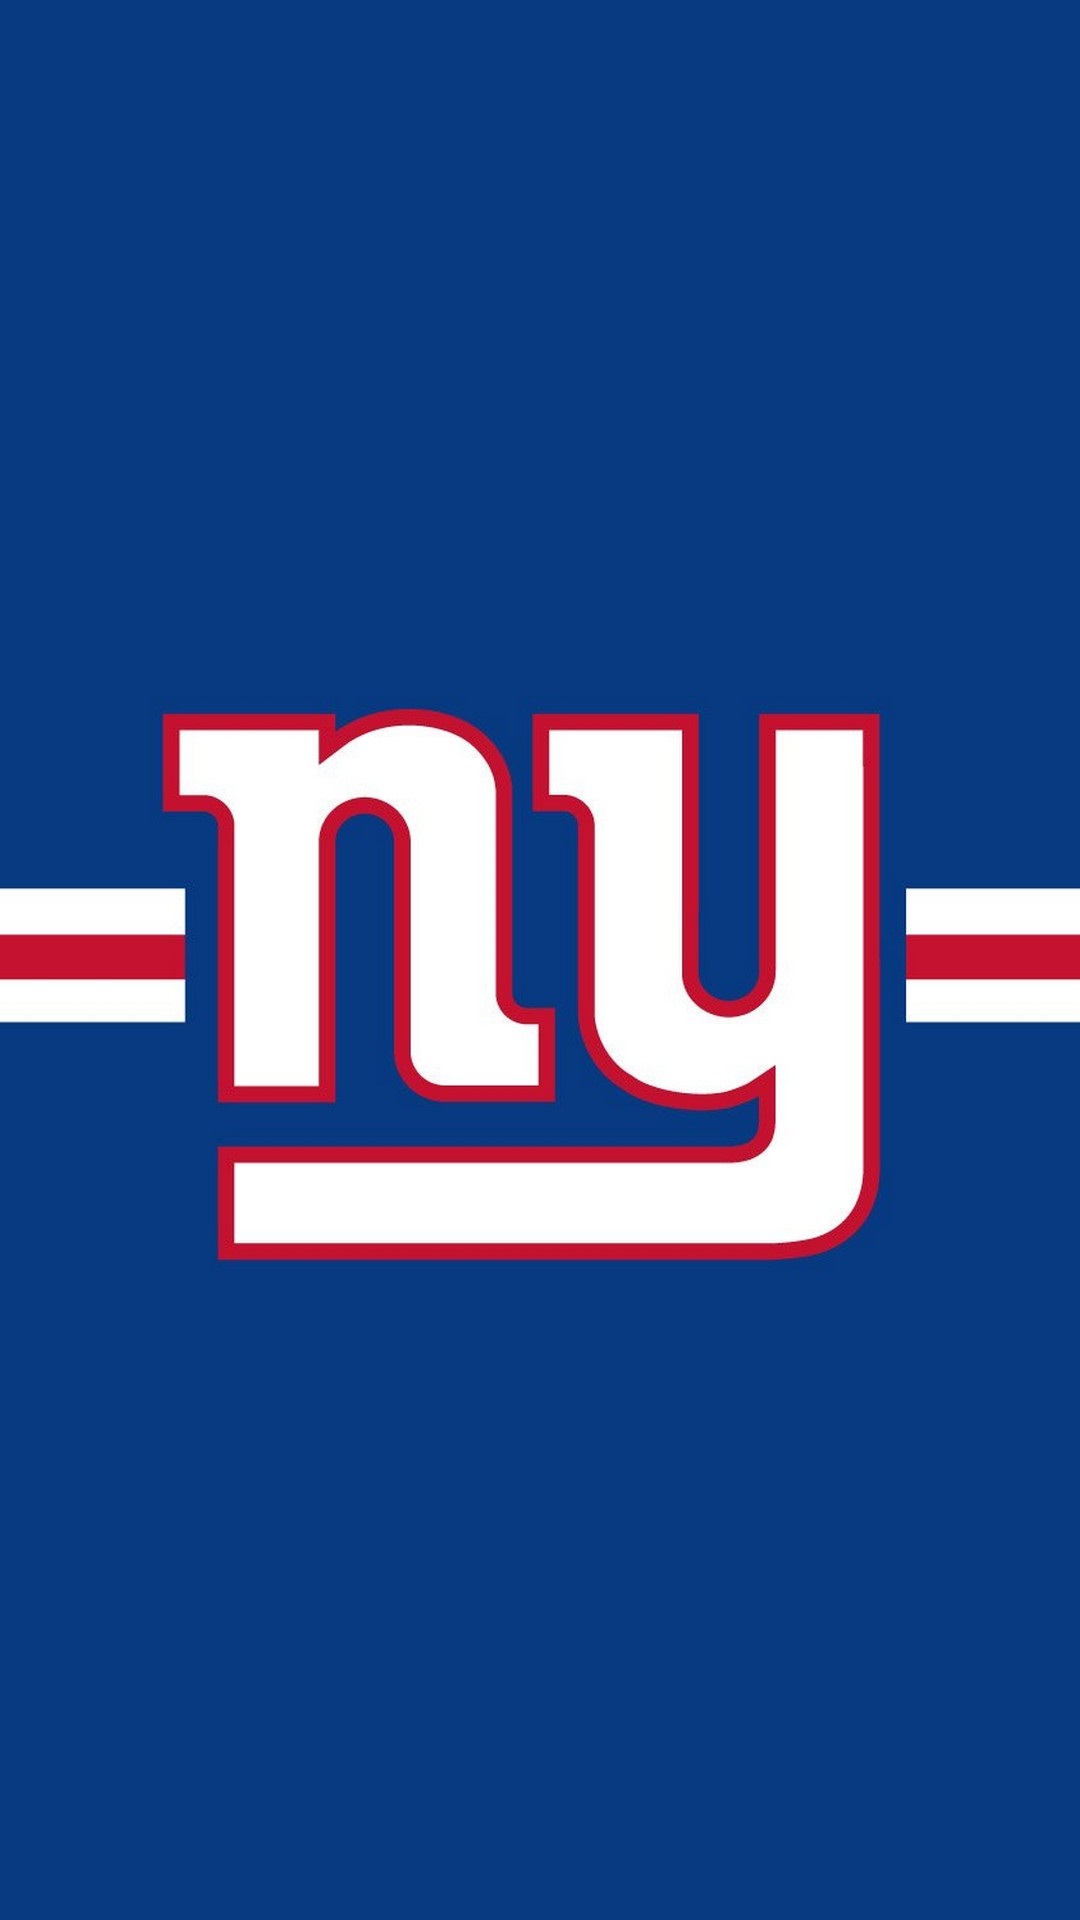 New York Giants iPhone 7 Wallpaper With high-resolution 1080X1920 pixel. Download and set as wallpaper for Desktop Computer, Apple iPhone X, XS Max, XR, 8, 7, 6, SE, iPad, Android